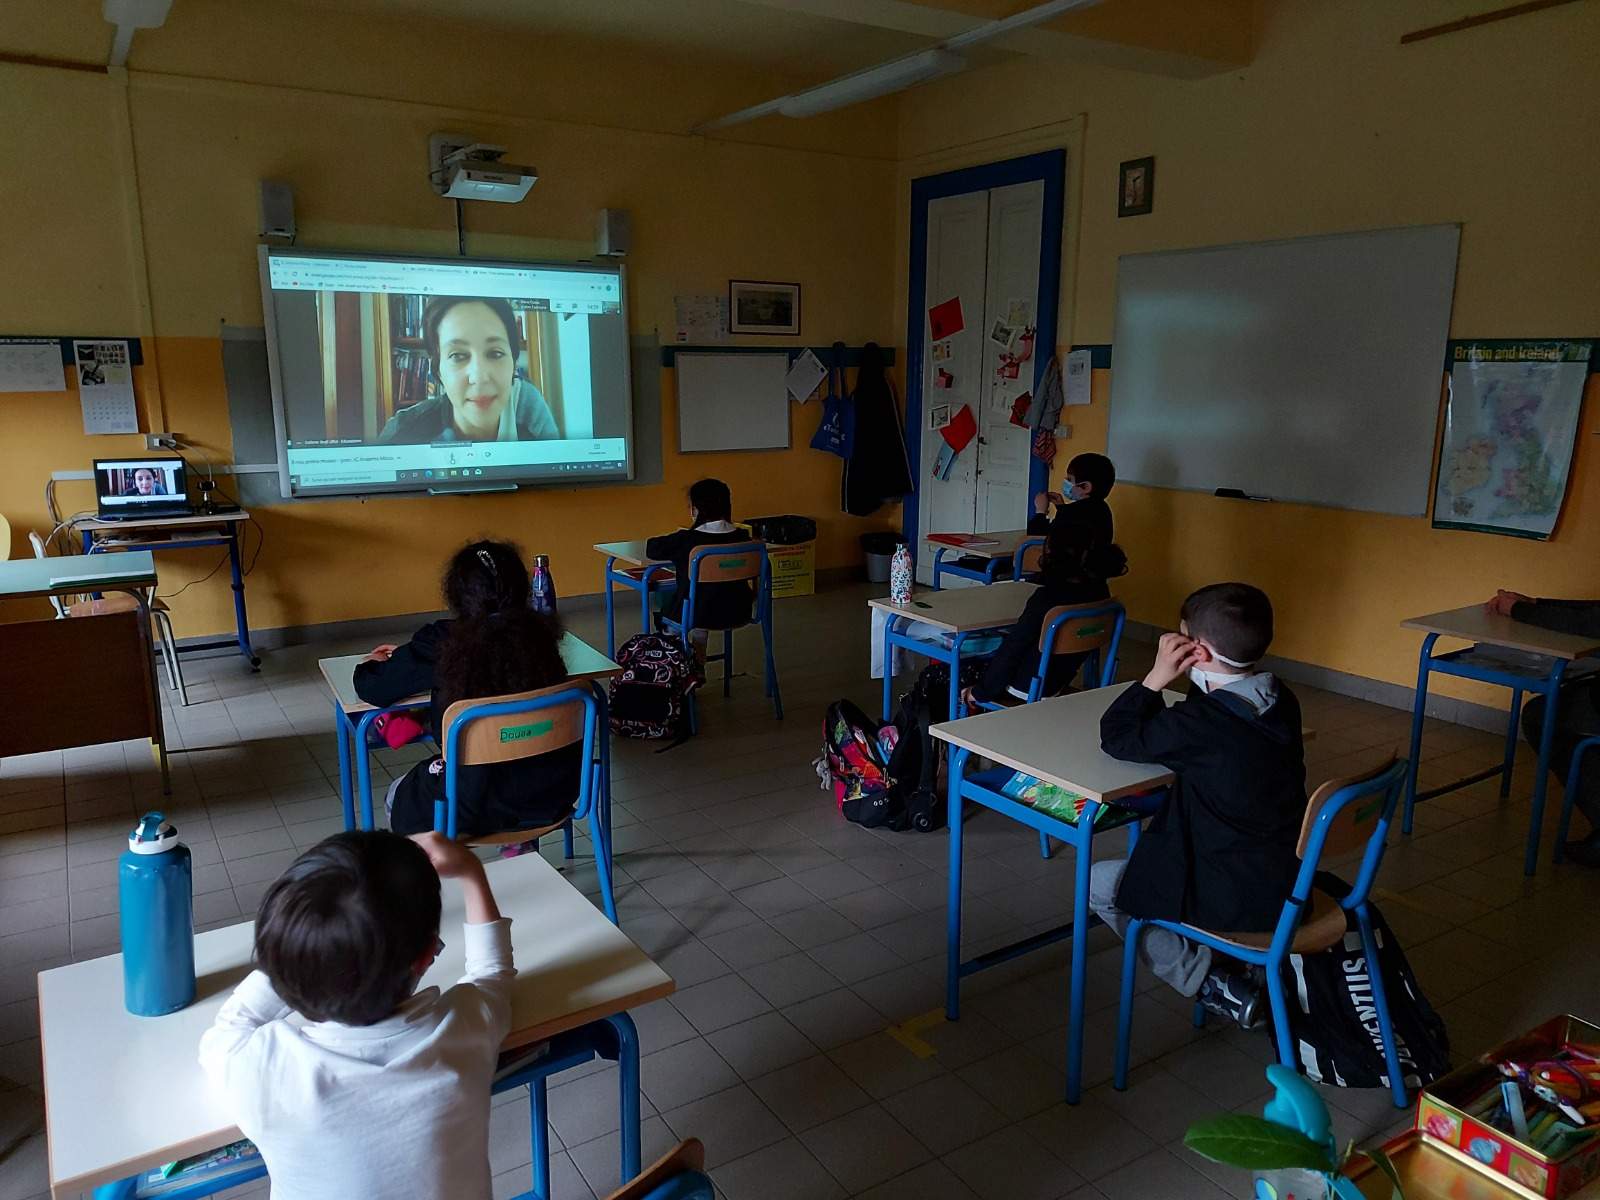 Uffizi DAD arrives in schools: free lessons to tell about Renaissance masterpieces